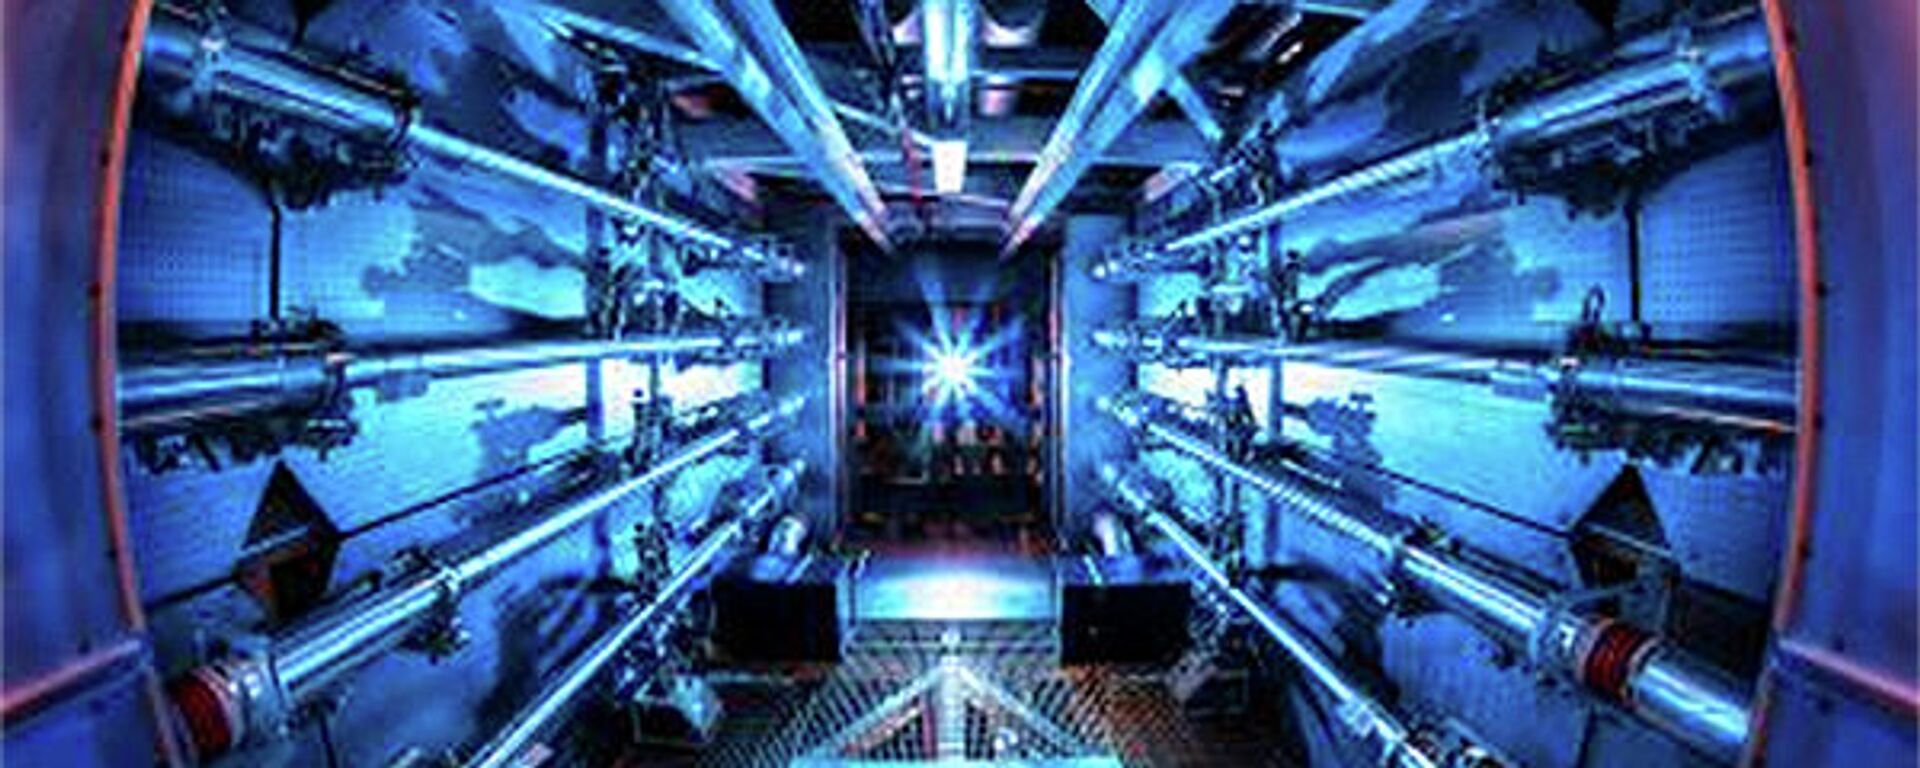 This image shows the preamplifiers of the National Ignition Facility in California. The unified lasers deliver 1.8 megajoules of energy and 500 terawatts of power – 1,000 times more than the United States uses at any one moment. - Sputnik International, 1920, 13.12.2022